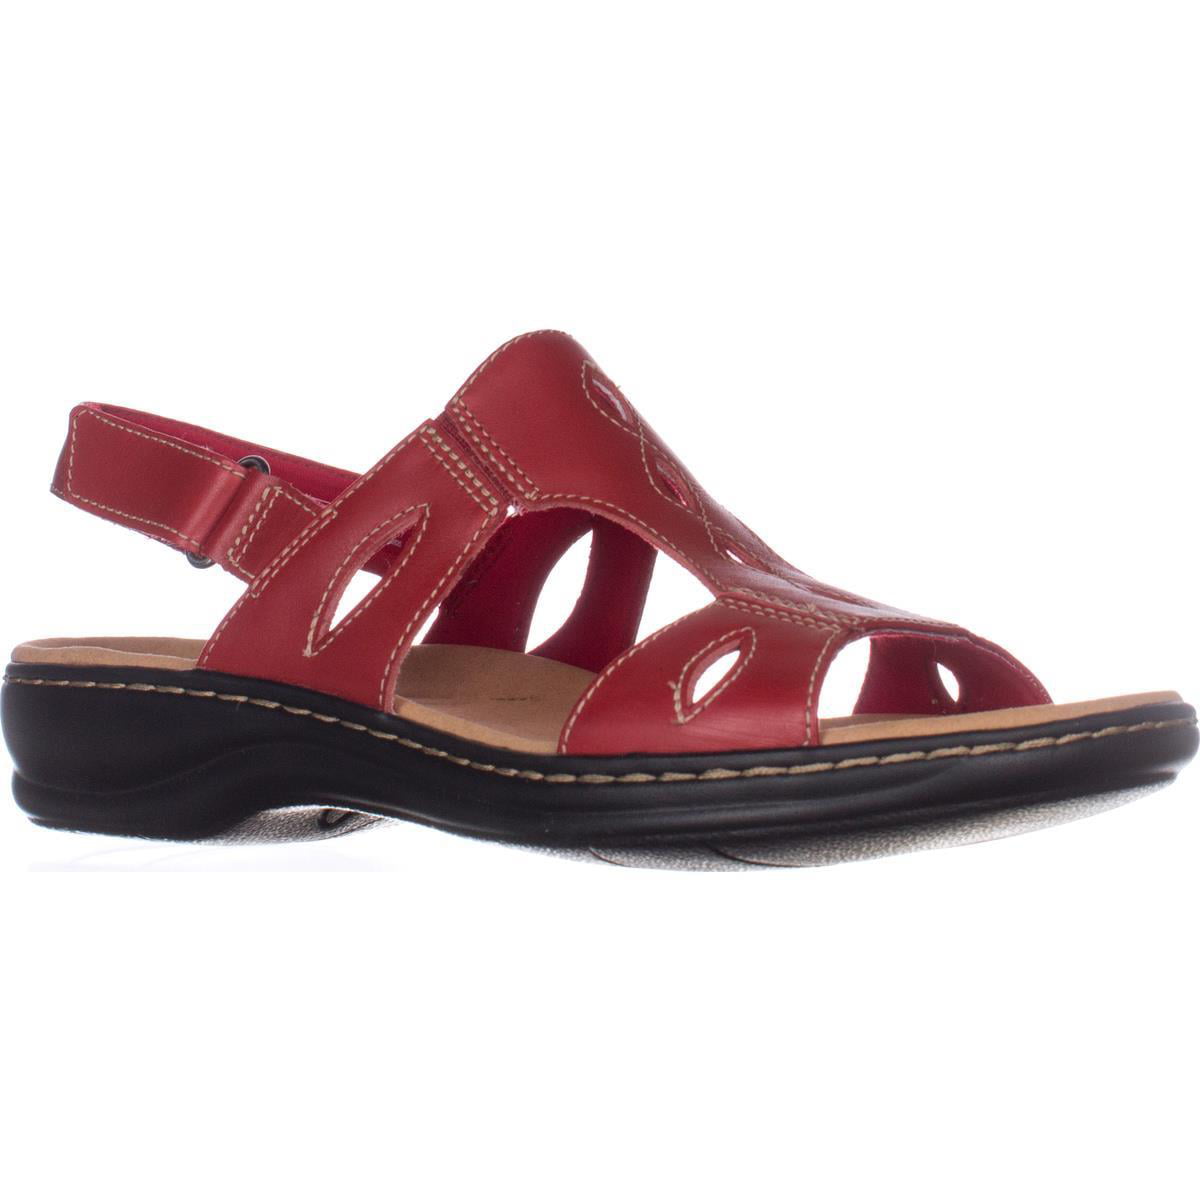 Clarks - Womens Clarks Leisa Lakelyn Cutout Slingback Sandals - Red ...